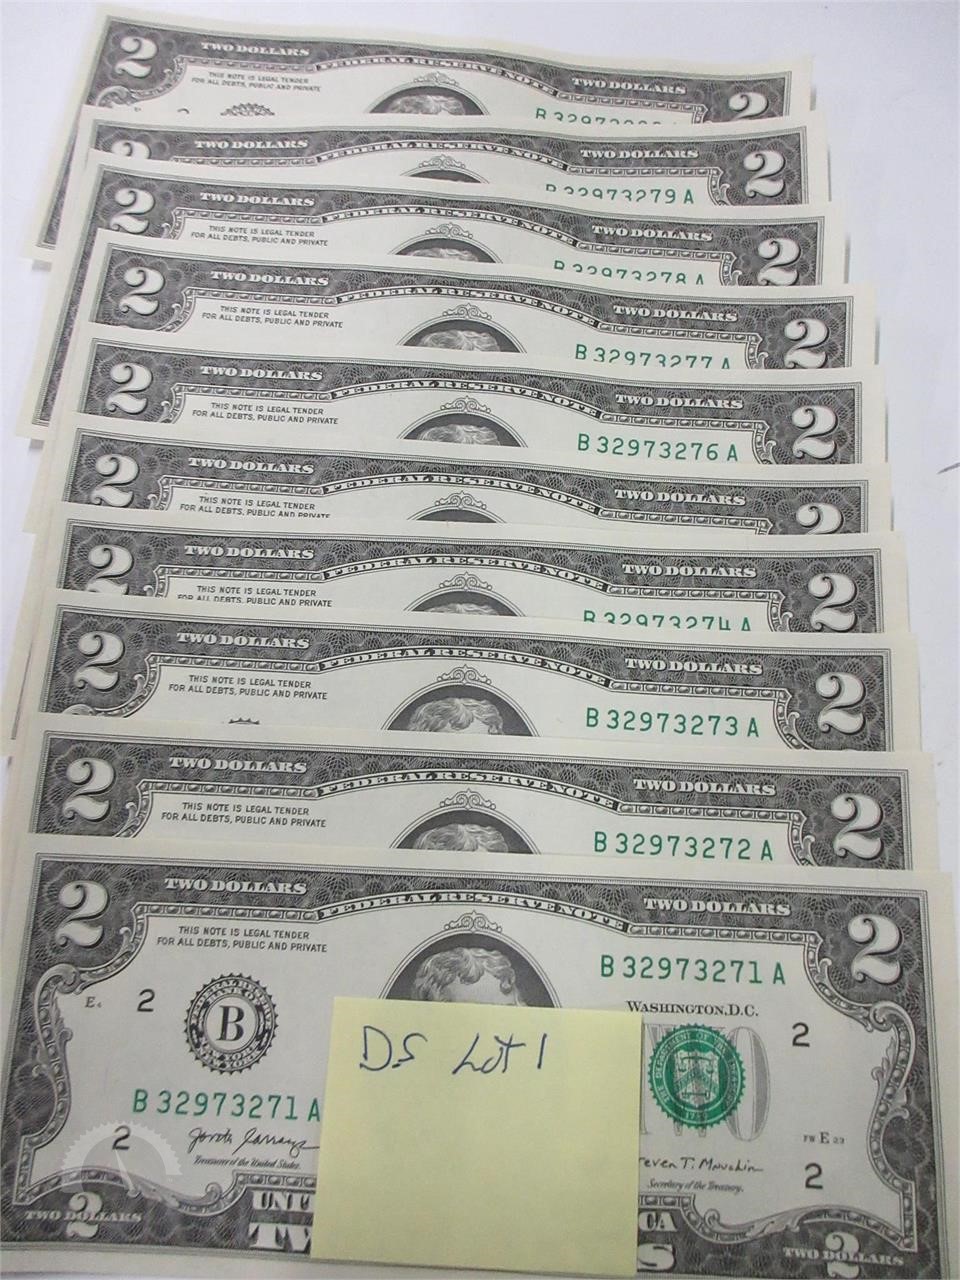 U.S. Currency Coins / Currency Auction Results